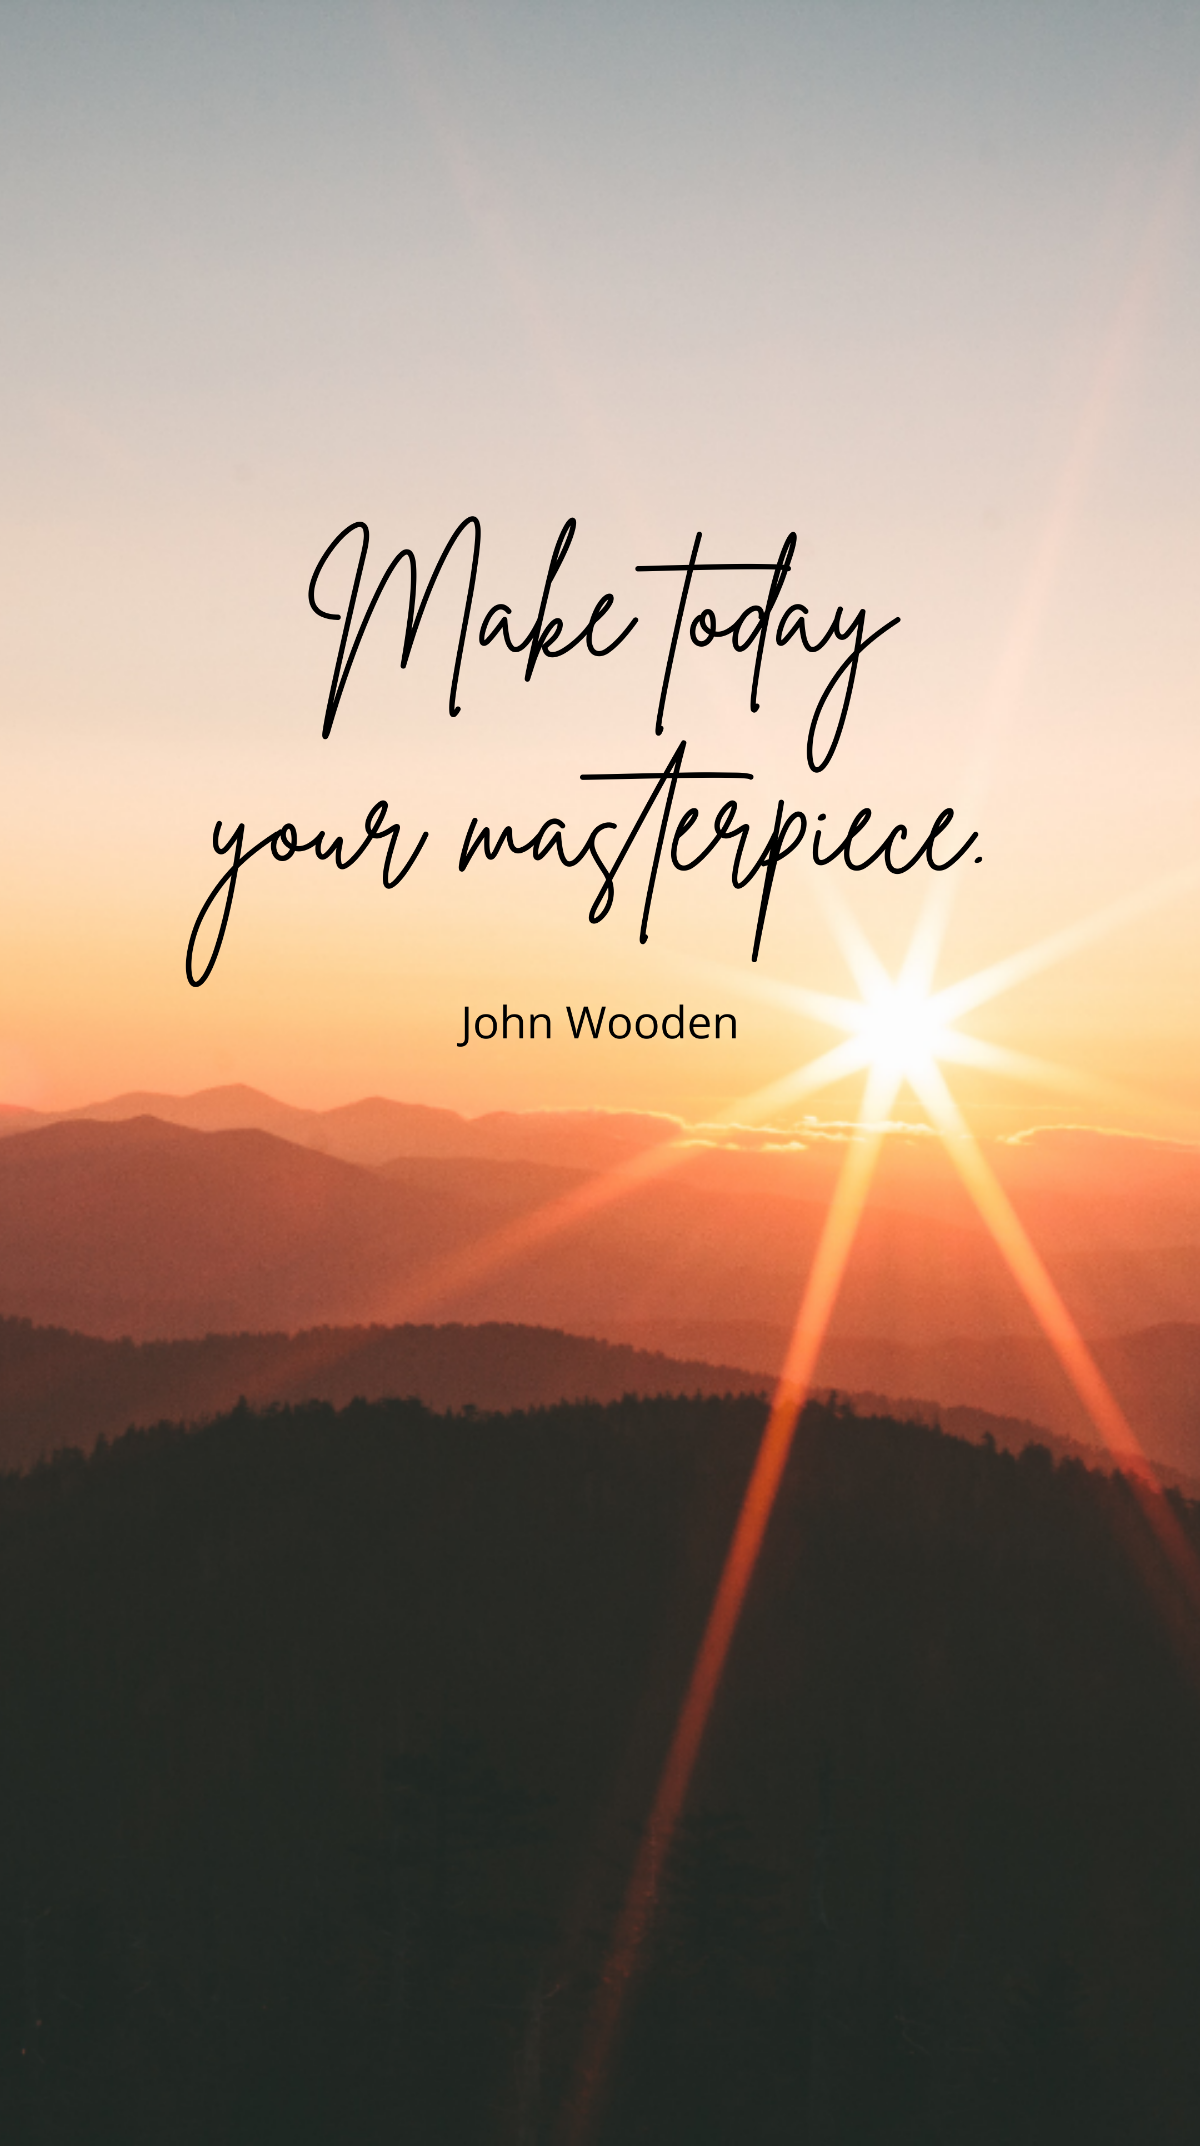 John Wooden - Make today your masterpiece. Template